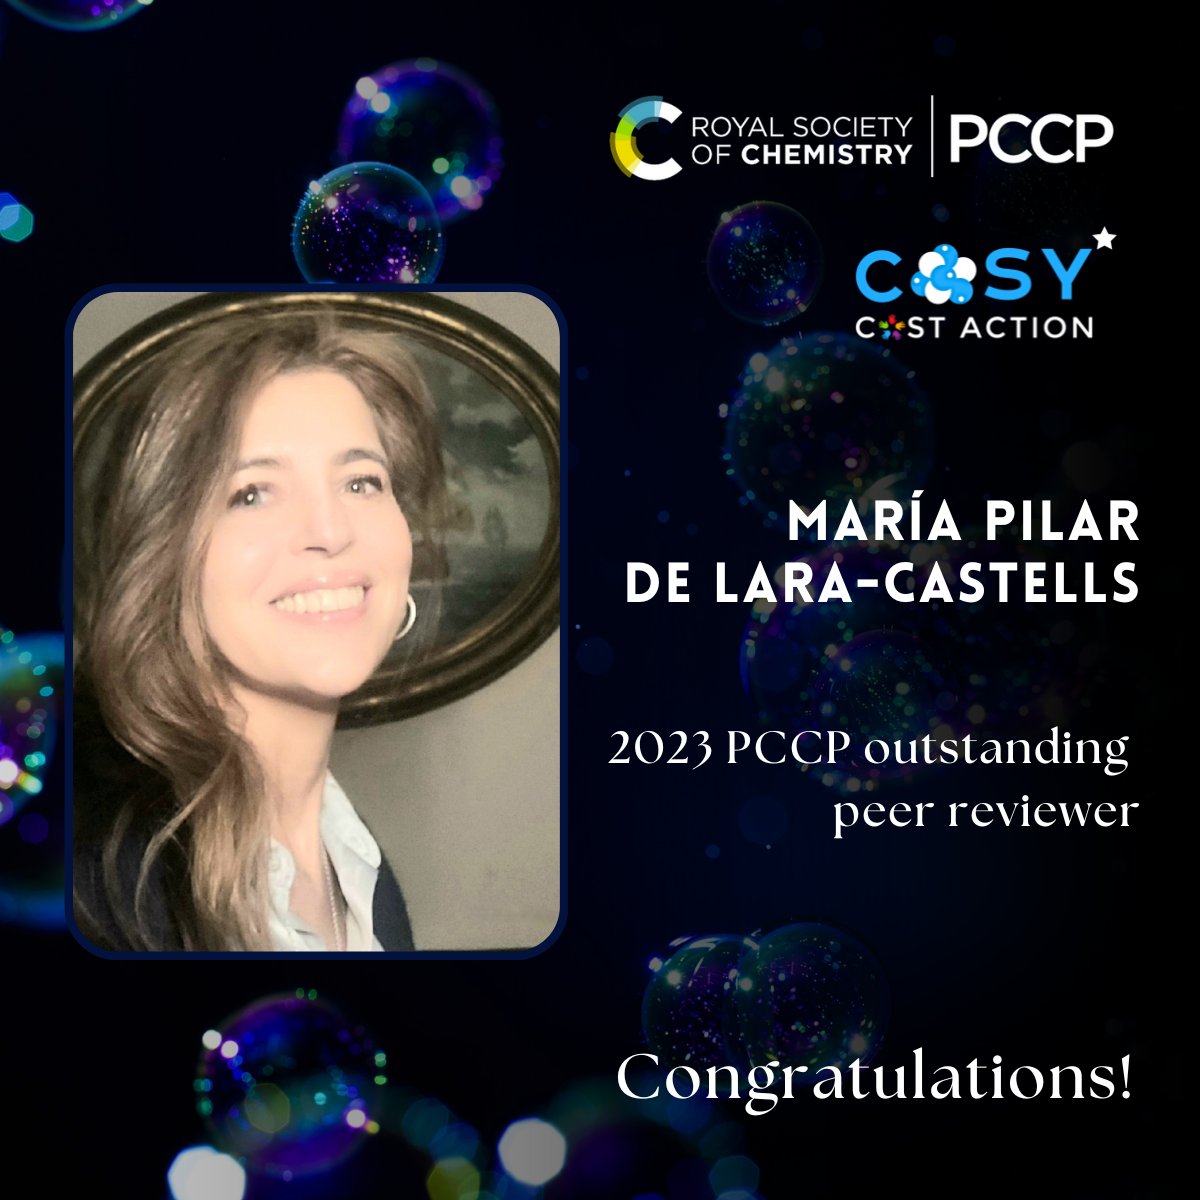 We are delighted to share that @MARIAPILARDELA1 from @iff_csic , the Chair of @COSY_Action has been honored as 2023 Outstanding Peer Reviewer by the @RoySocChem @PCCP ! Congratulations on this well-deserved recognition! We are proud! COSY SM Team @COSTprogramme @Europeos_CSIC